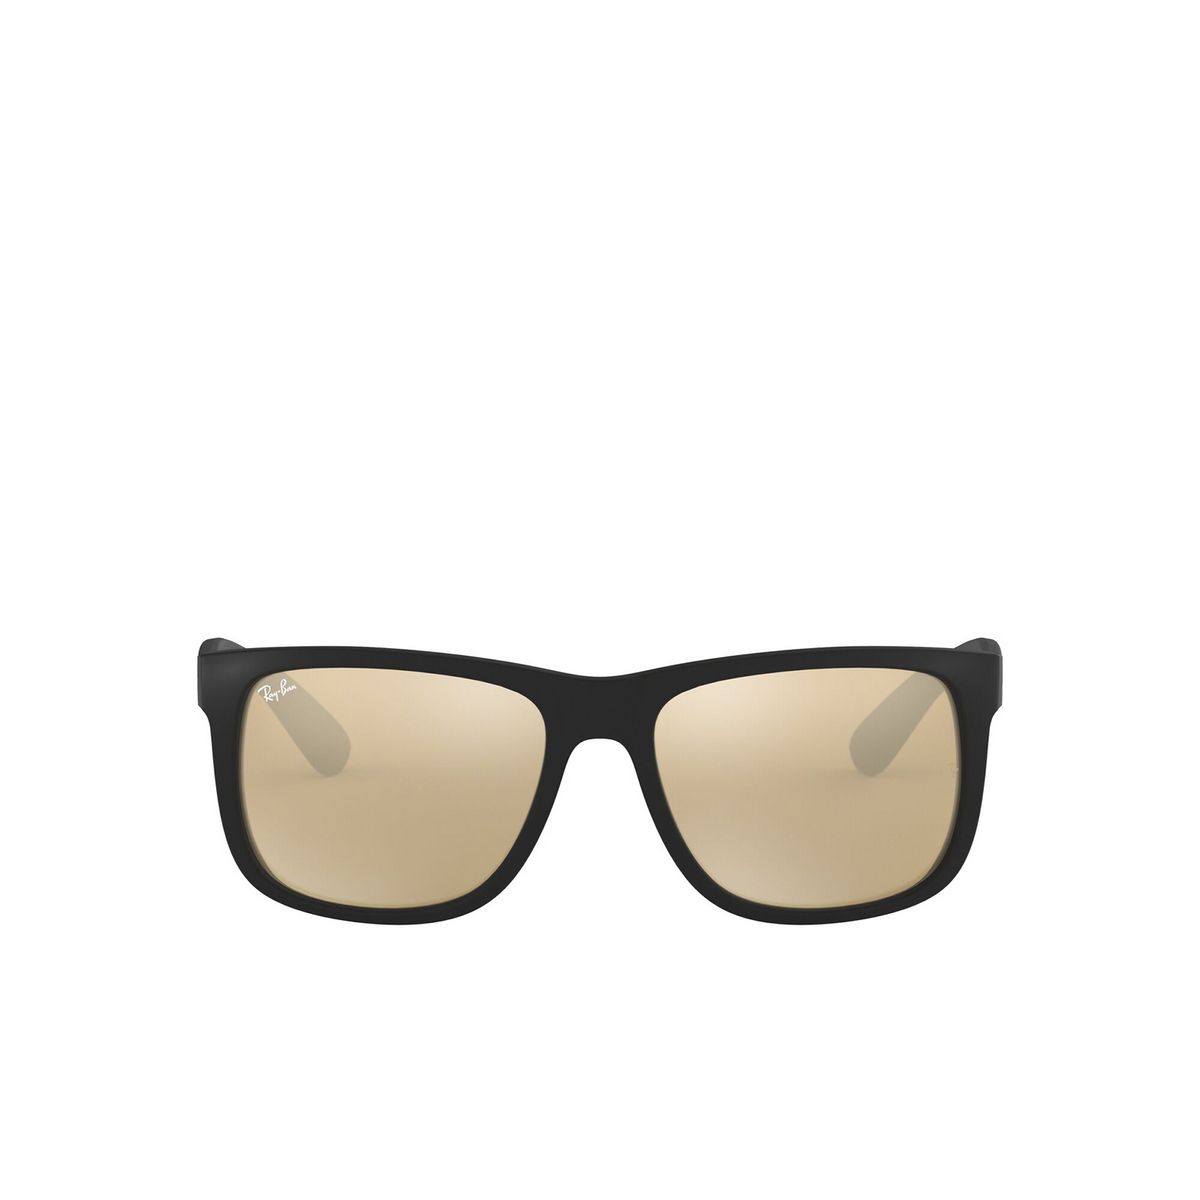 Ray-Ban® Square Sunglasses: RB4165 Justin color 622/5A Rubber Black - front view